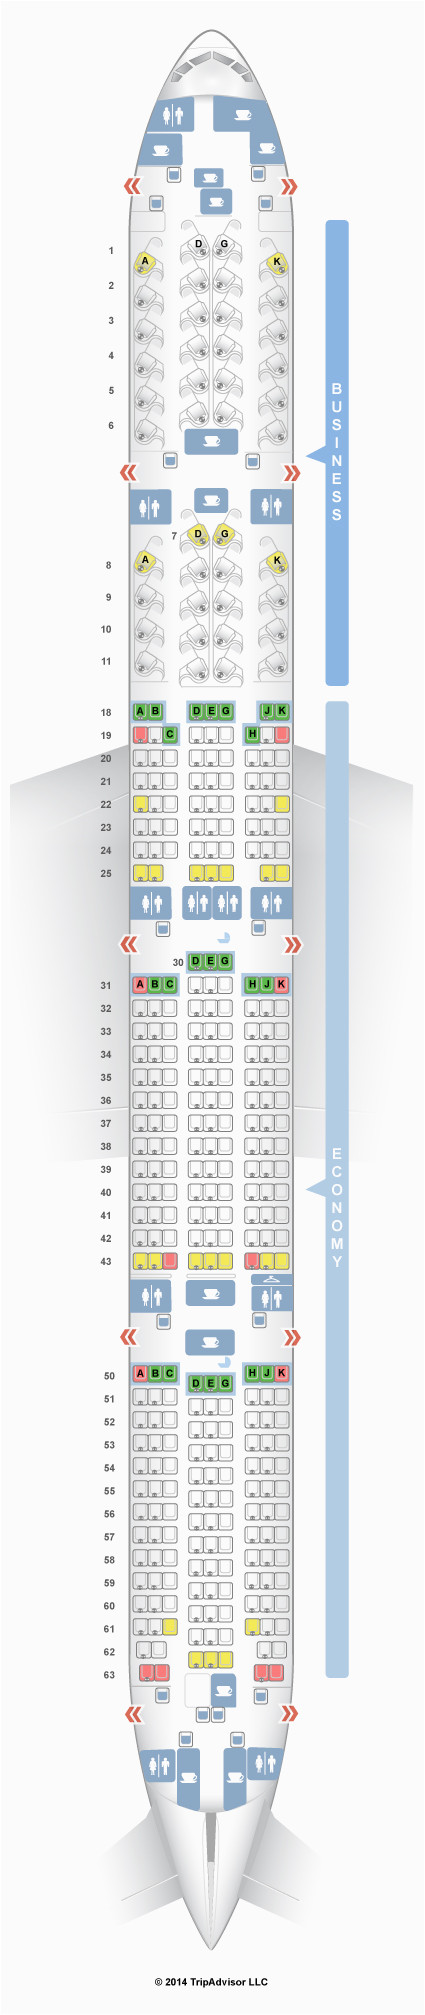 air canada aircraft 777 seating plan the best picture sugar and